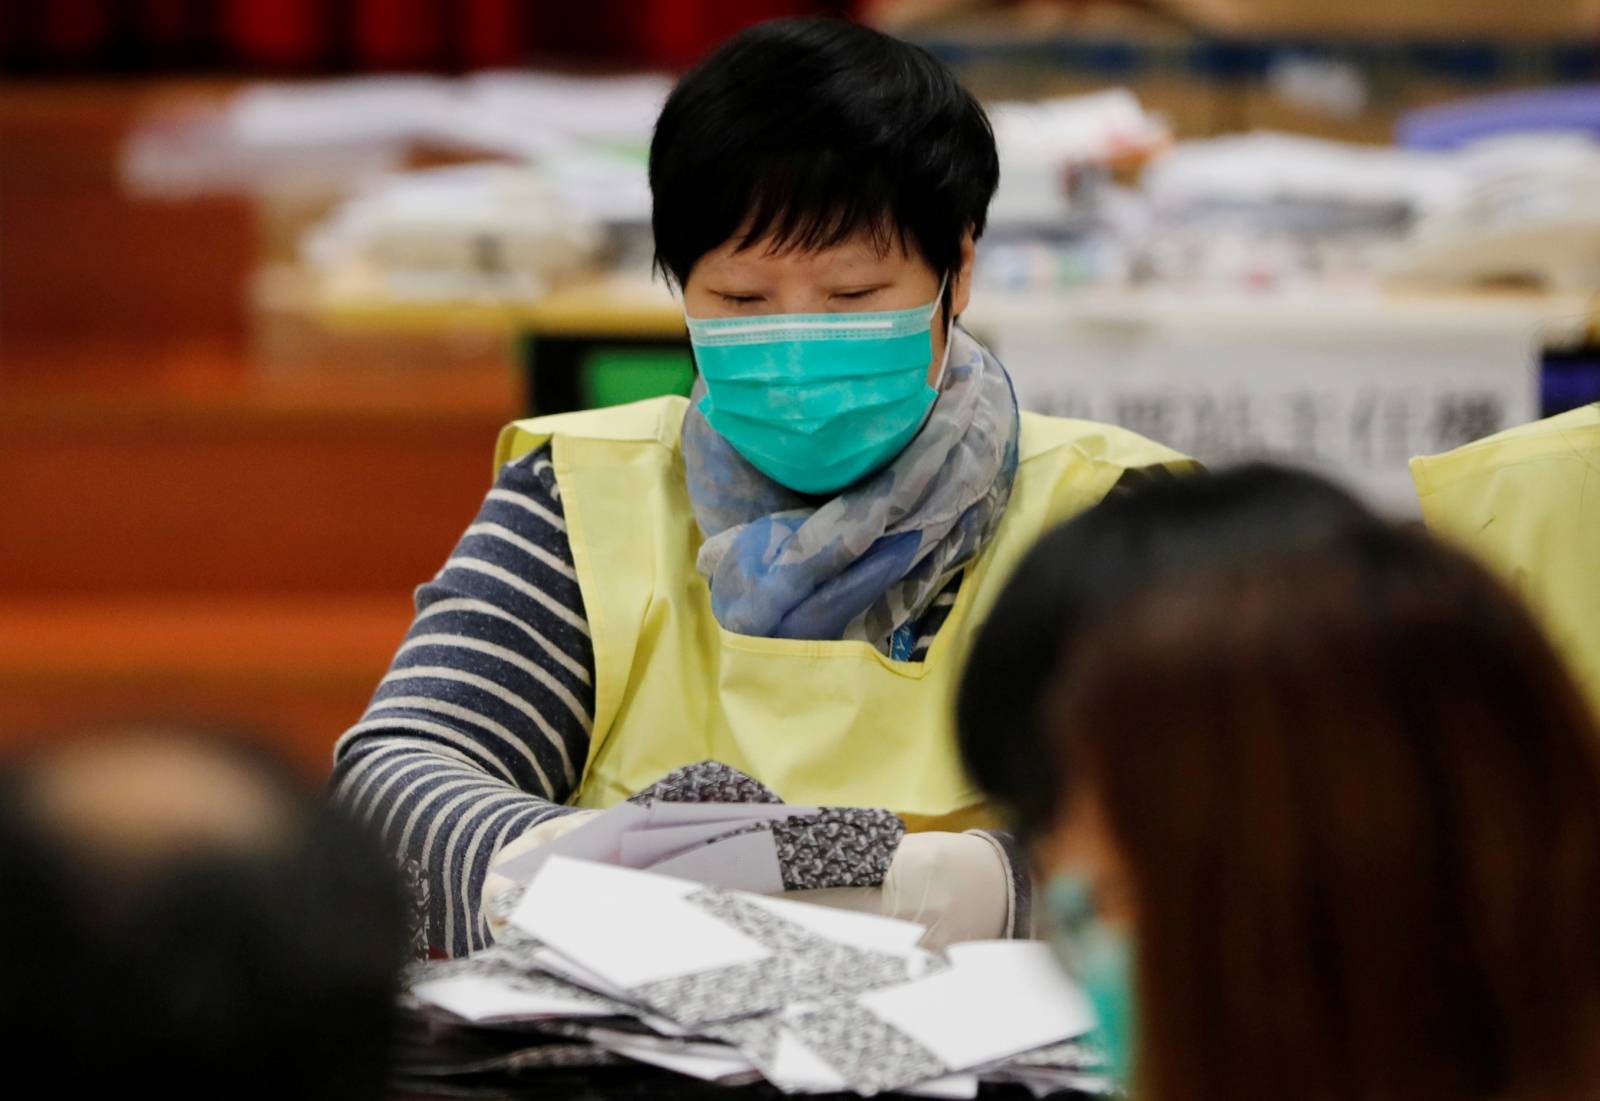 A polling official counts votes of the Hong Kong council elections, in a polling station in Hong Kong